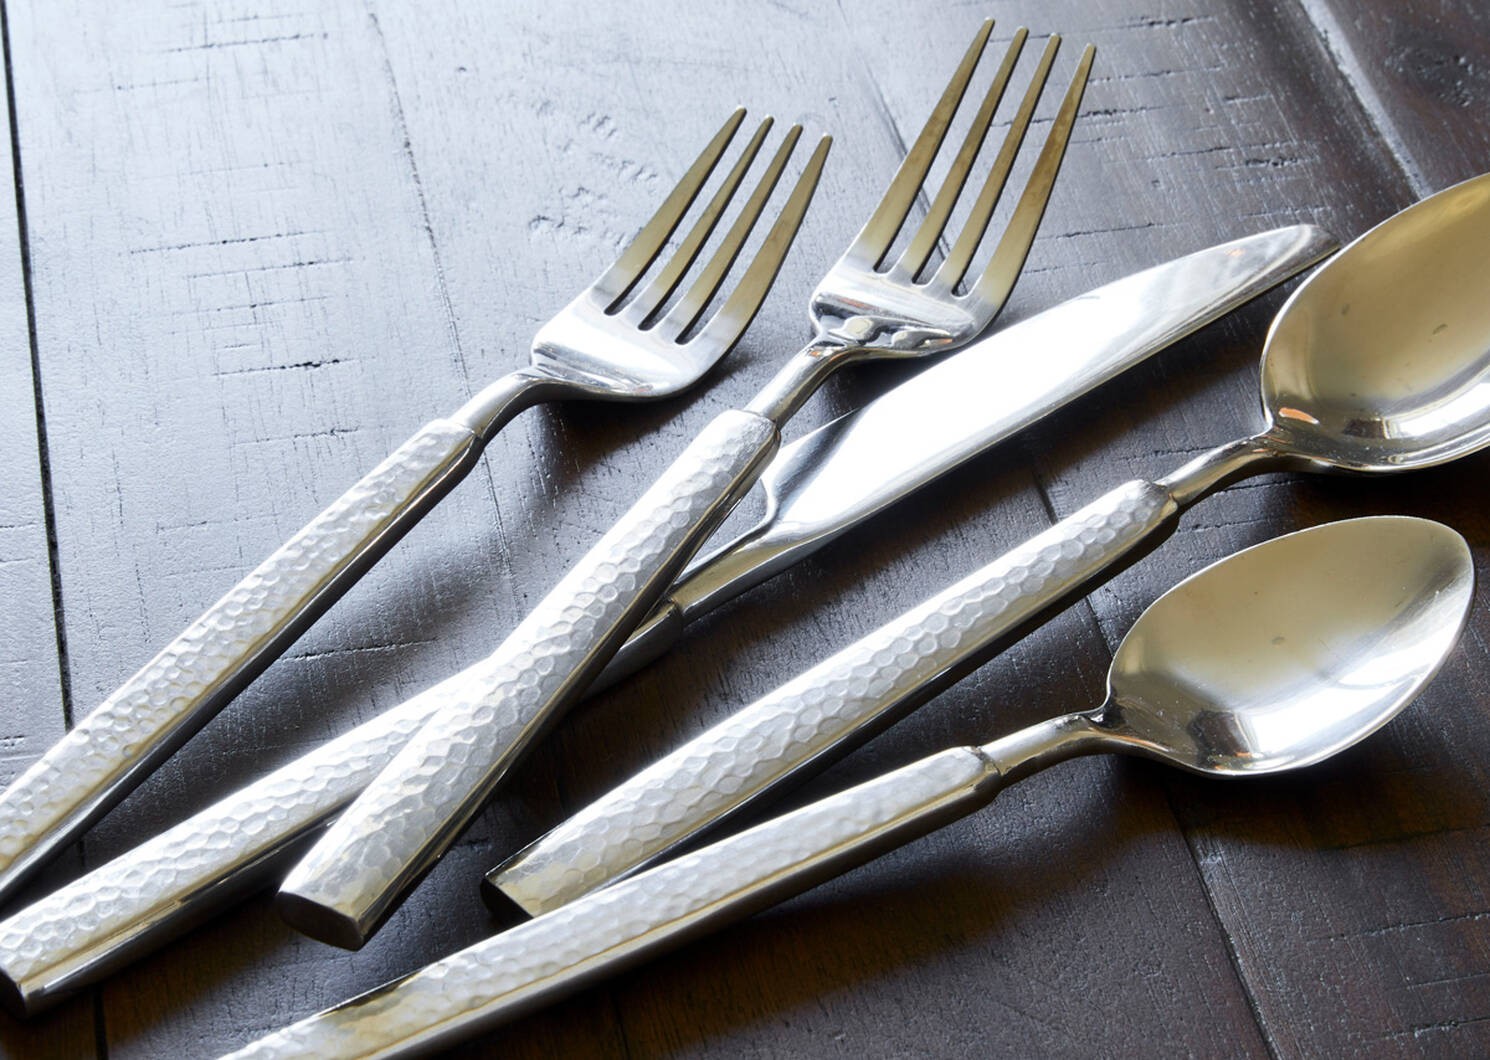 Hammered 5pc Cutlery Set Silver